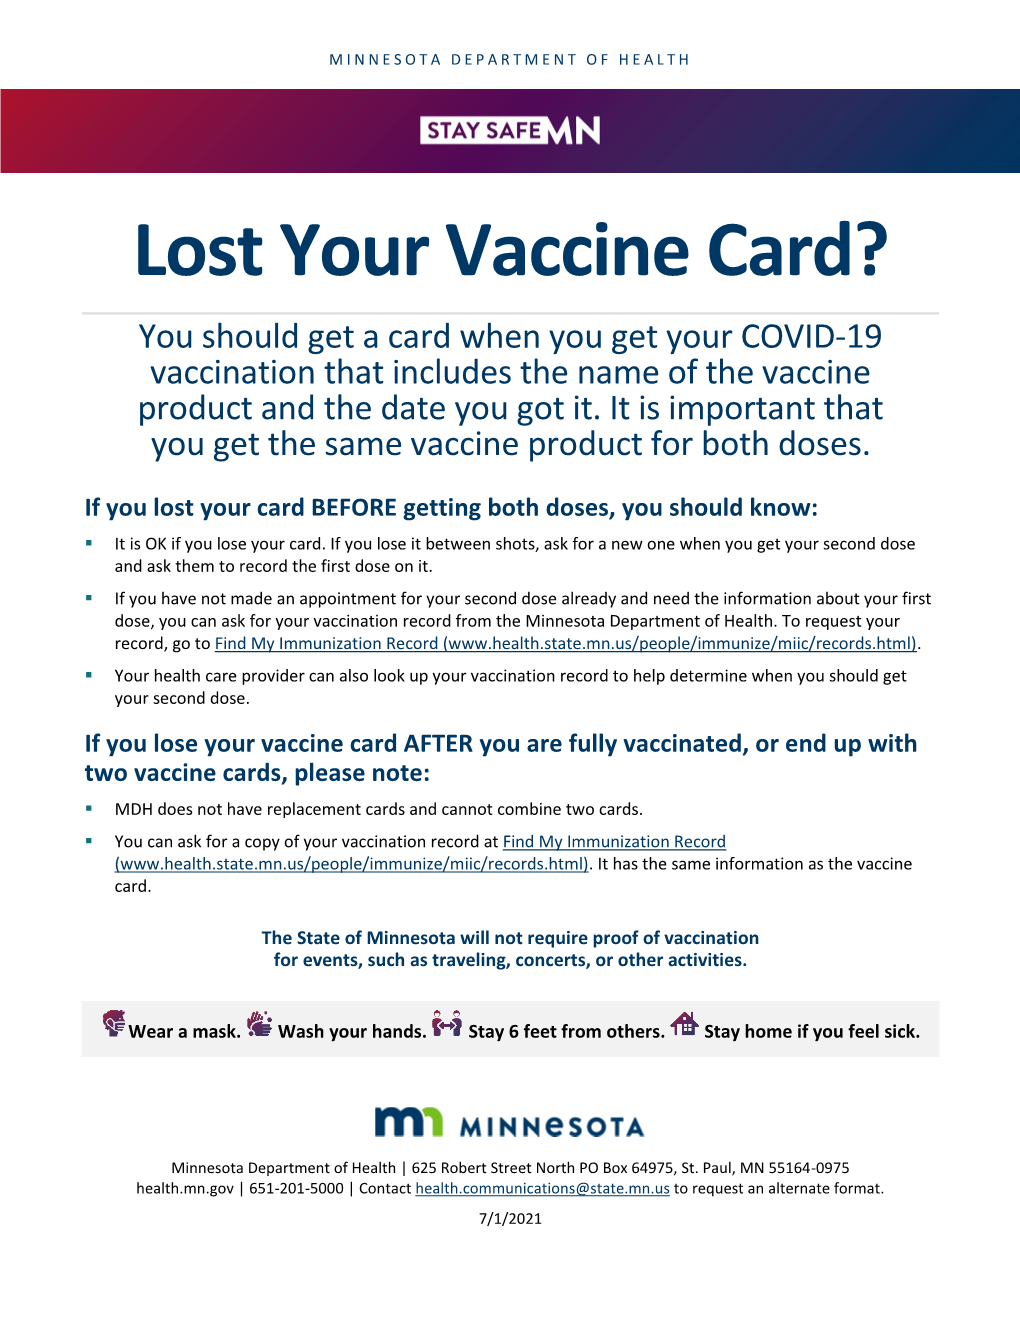 Lost Your Vaccine Card? You Should Get a Card When You Get Your COVID-19 Vaccination That Includes the Name of the Vaccine Product and the Date You Got It